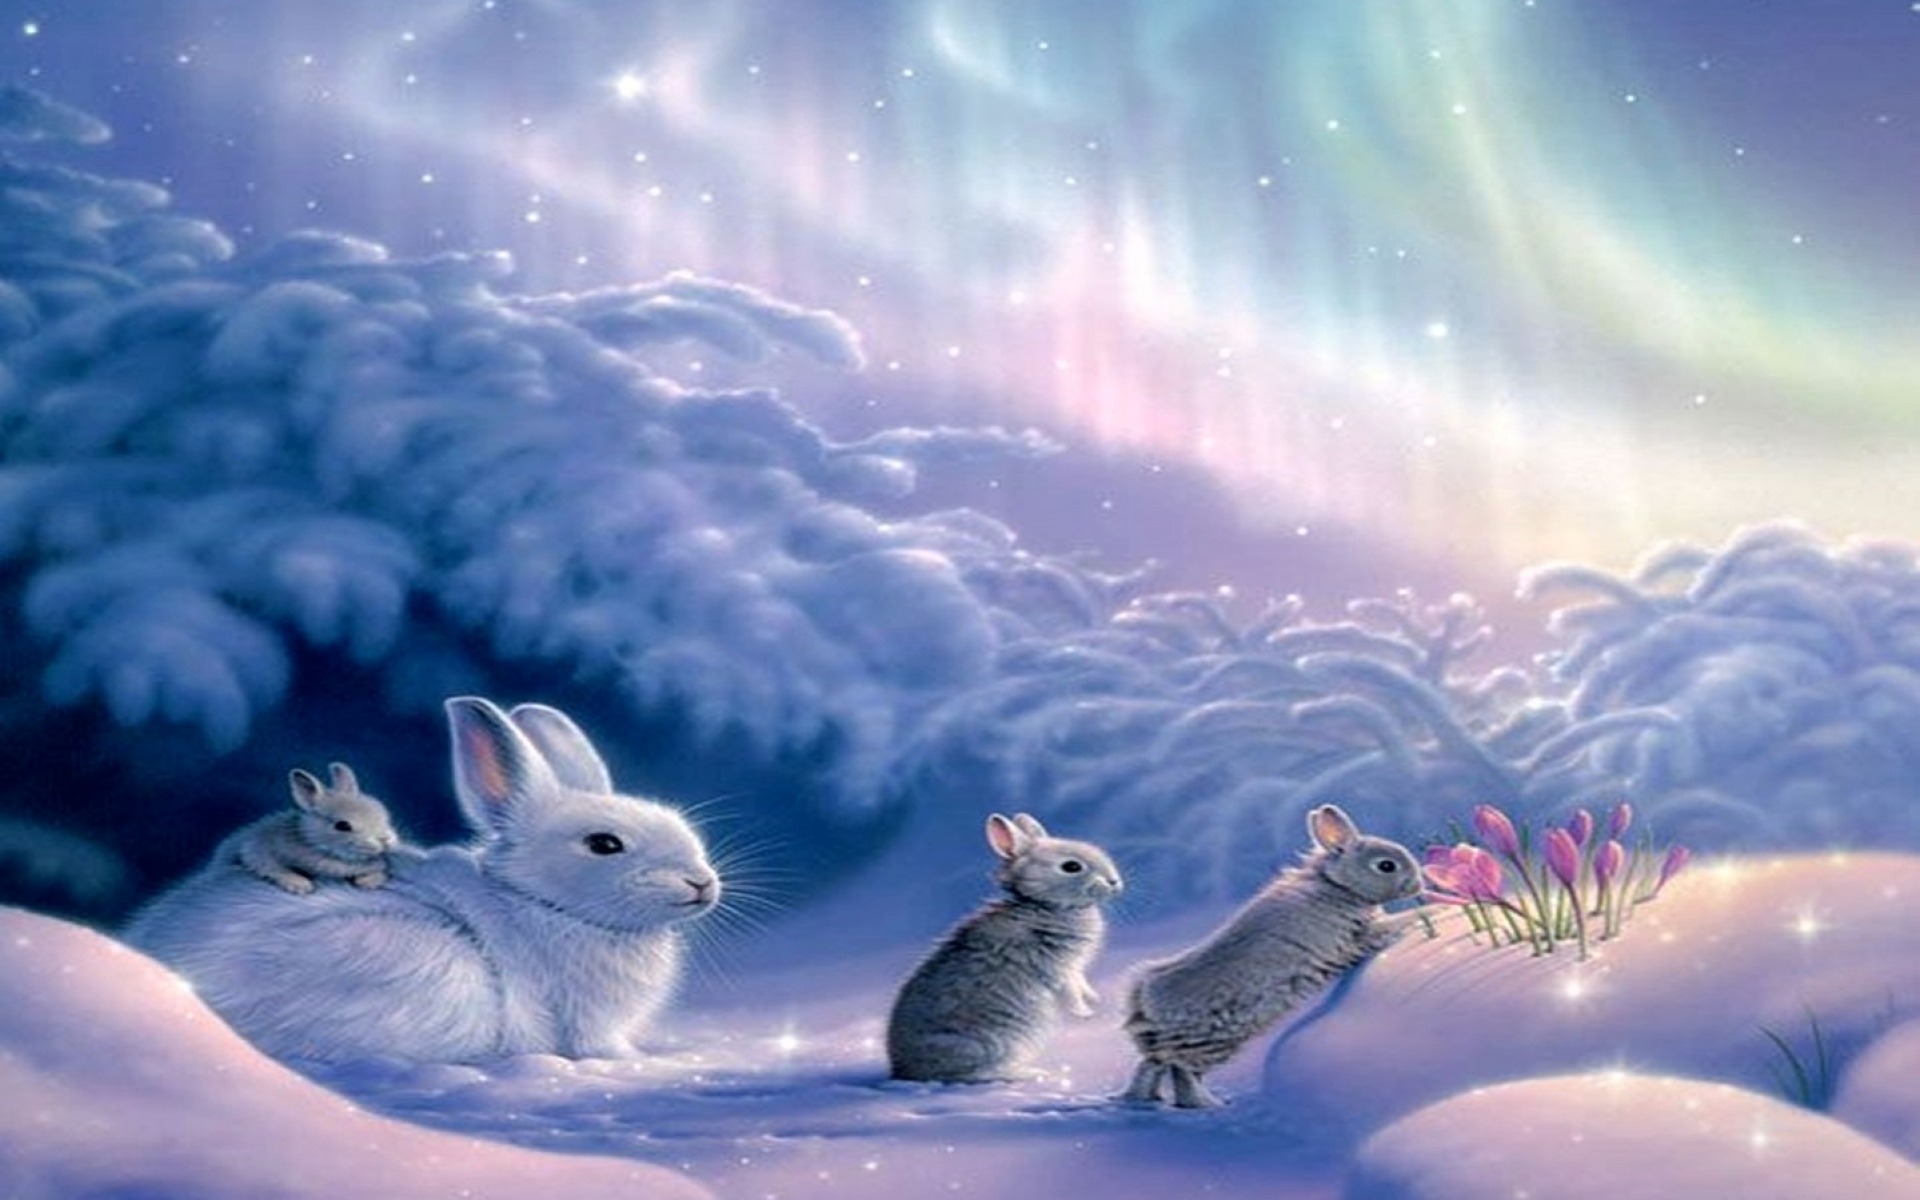 Bunnies in the Snow.